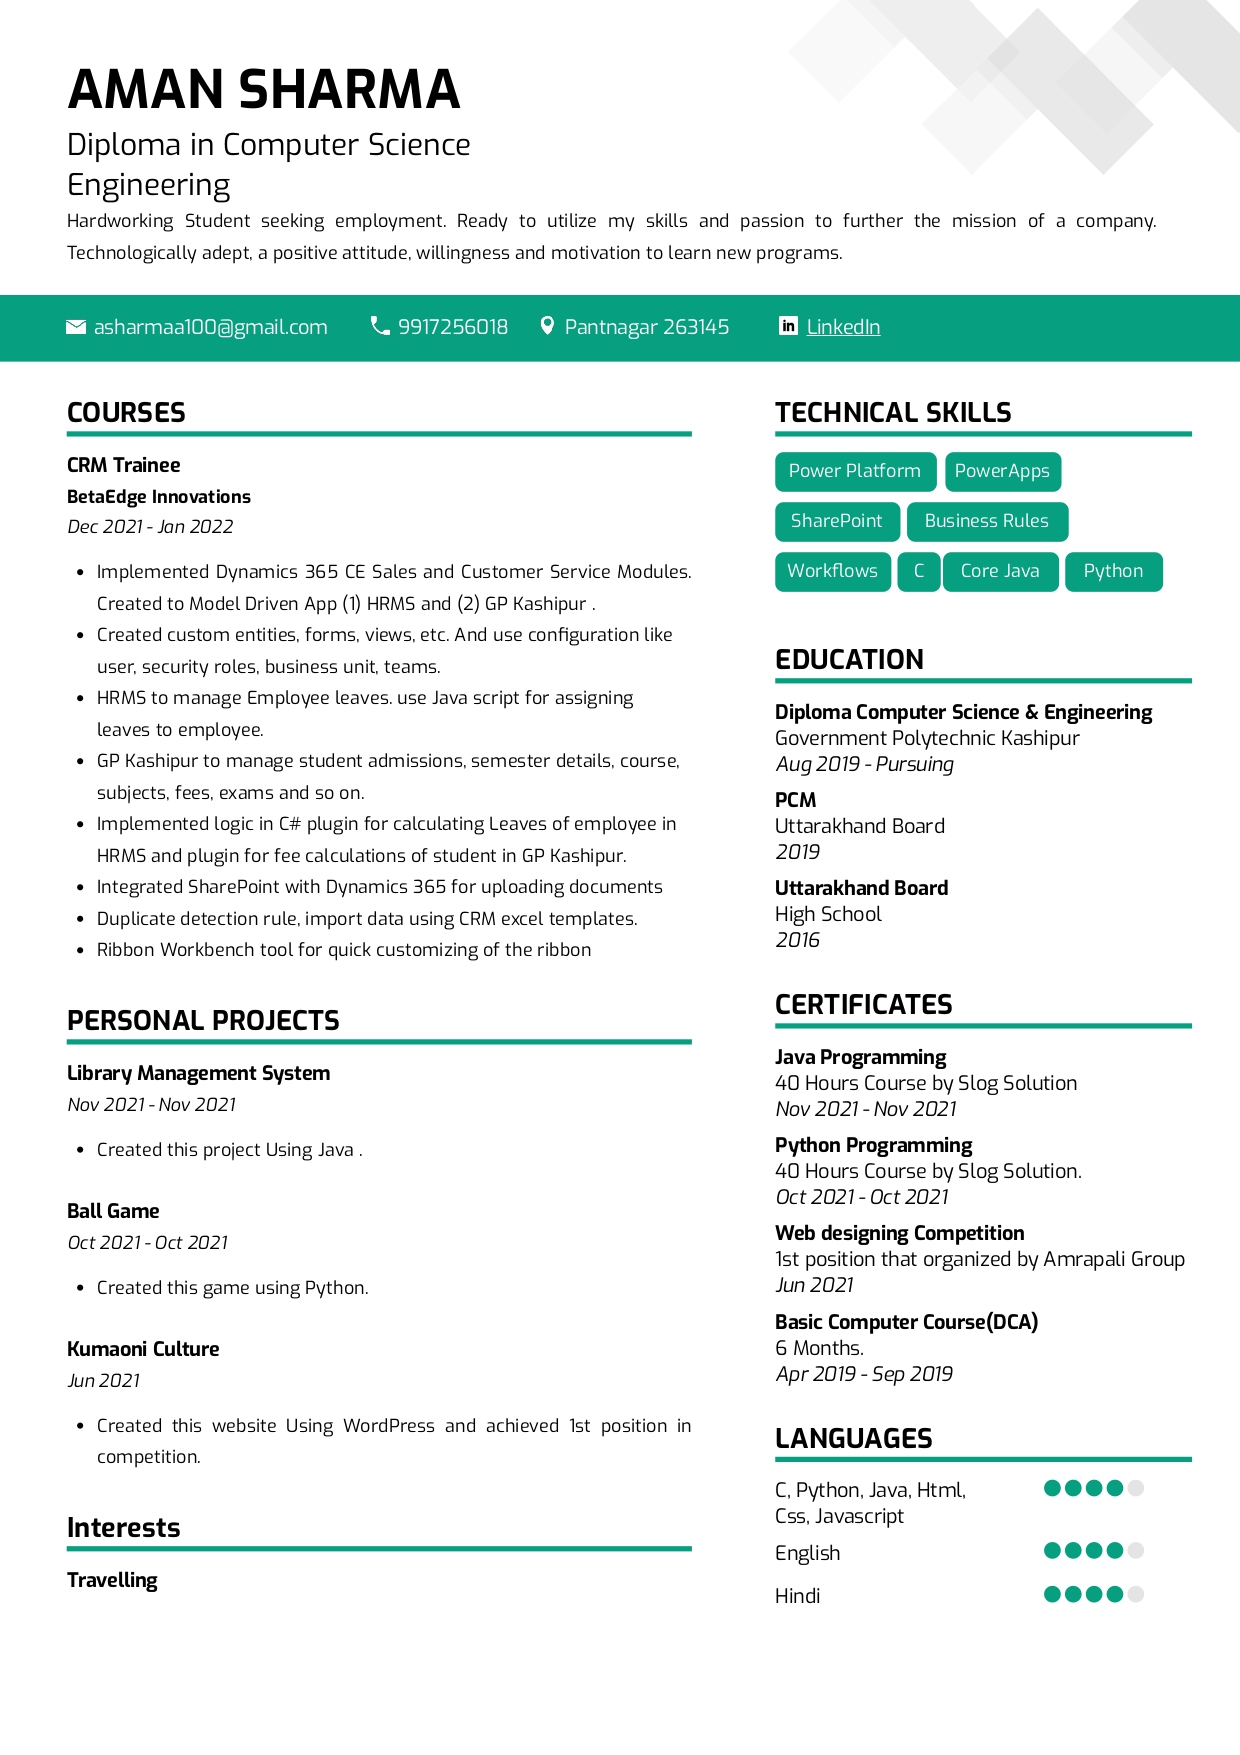 Sample Resume of a Computer Science Engineer | Free Resume Templates & Samples on Resumod.co